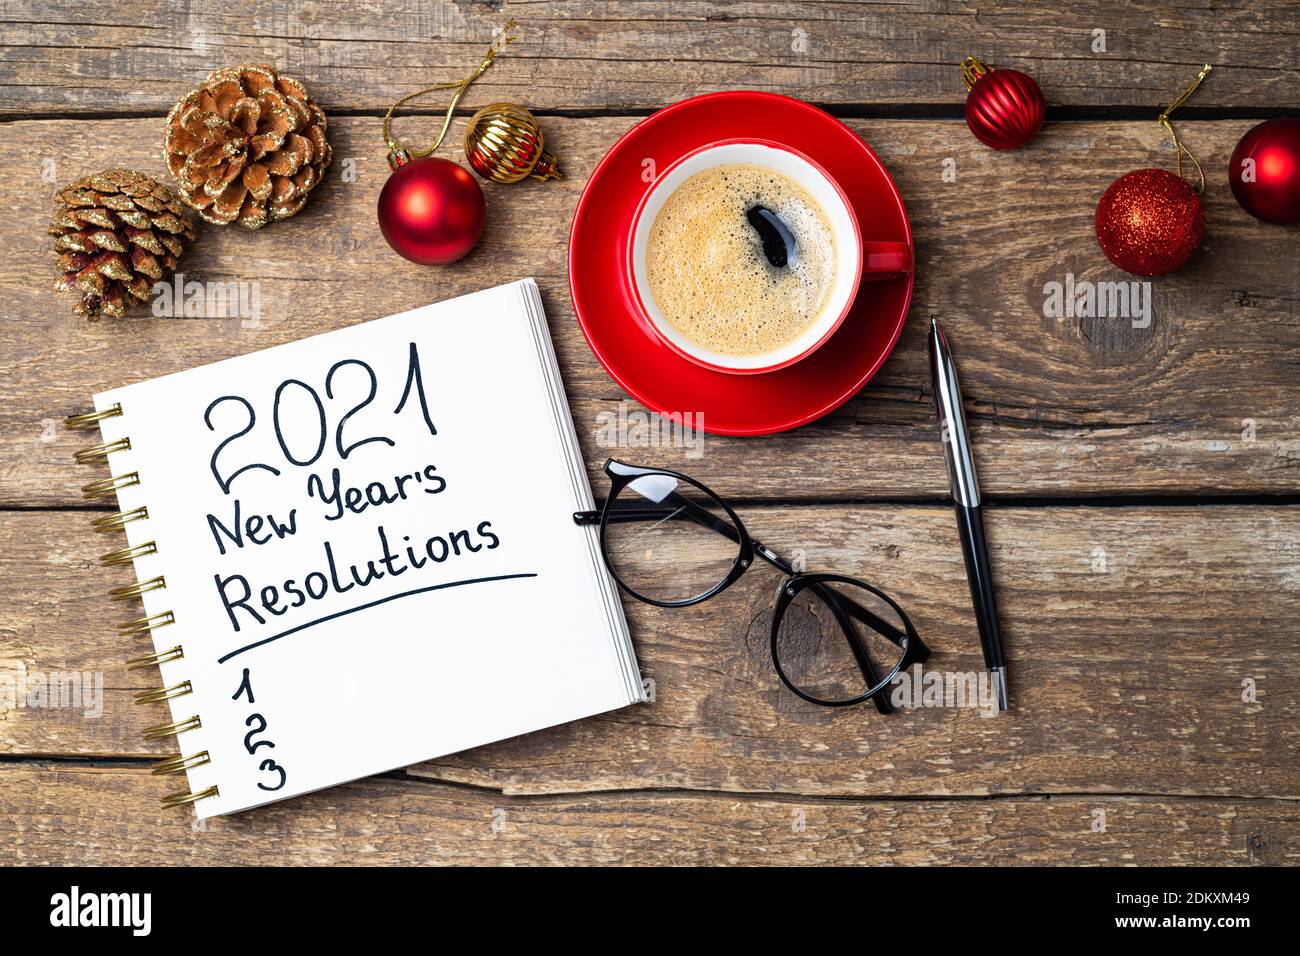 New year 2021 resolutions on desk. 2021 goals with notebook, coffee cup, eyeglasses, Christmas ornaments on wooden background. Goals, plan, strategy, Stock Photo